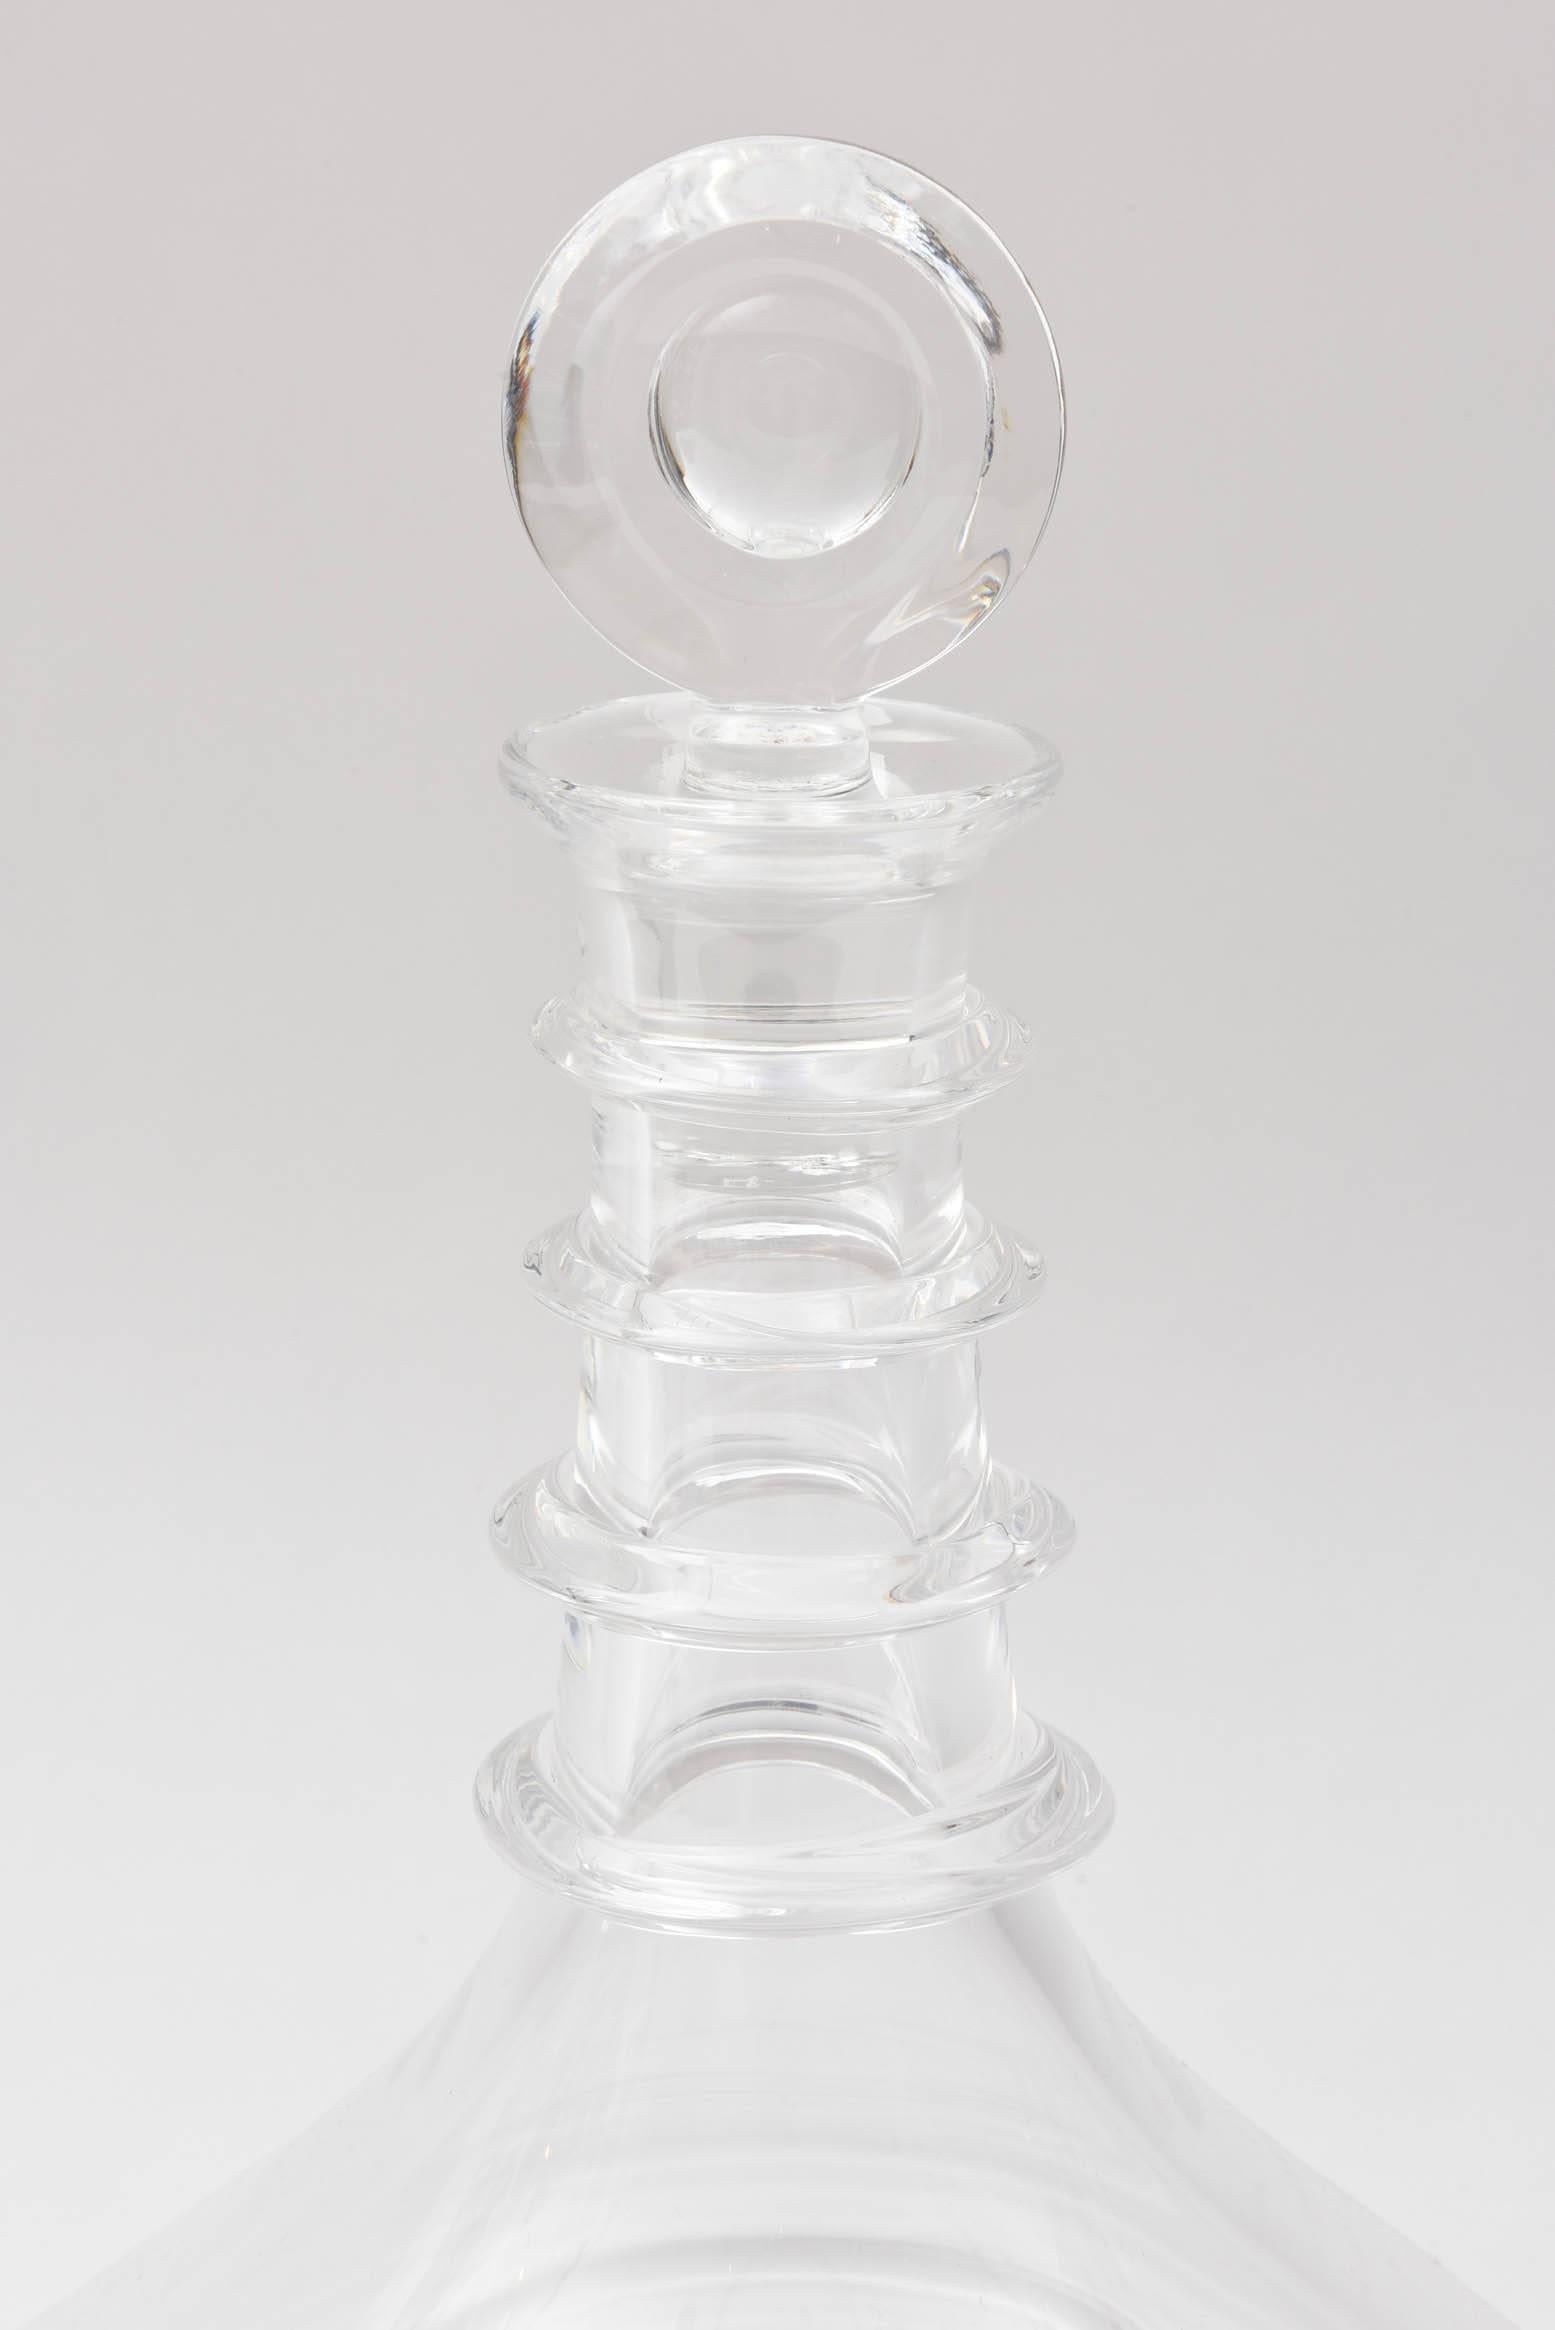 A classic pattern by the Corning New York Glass Maker. Clear and colorless with a nice wide base for decanting and serving. Original stopper and in wonderful vintage condition.